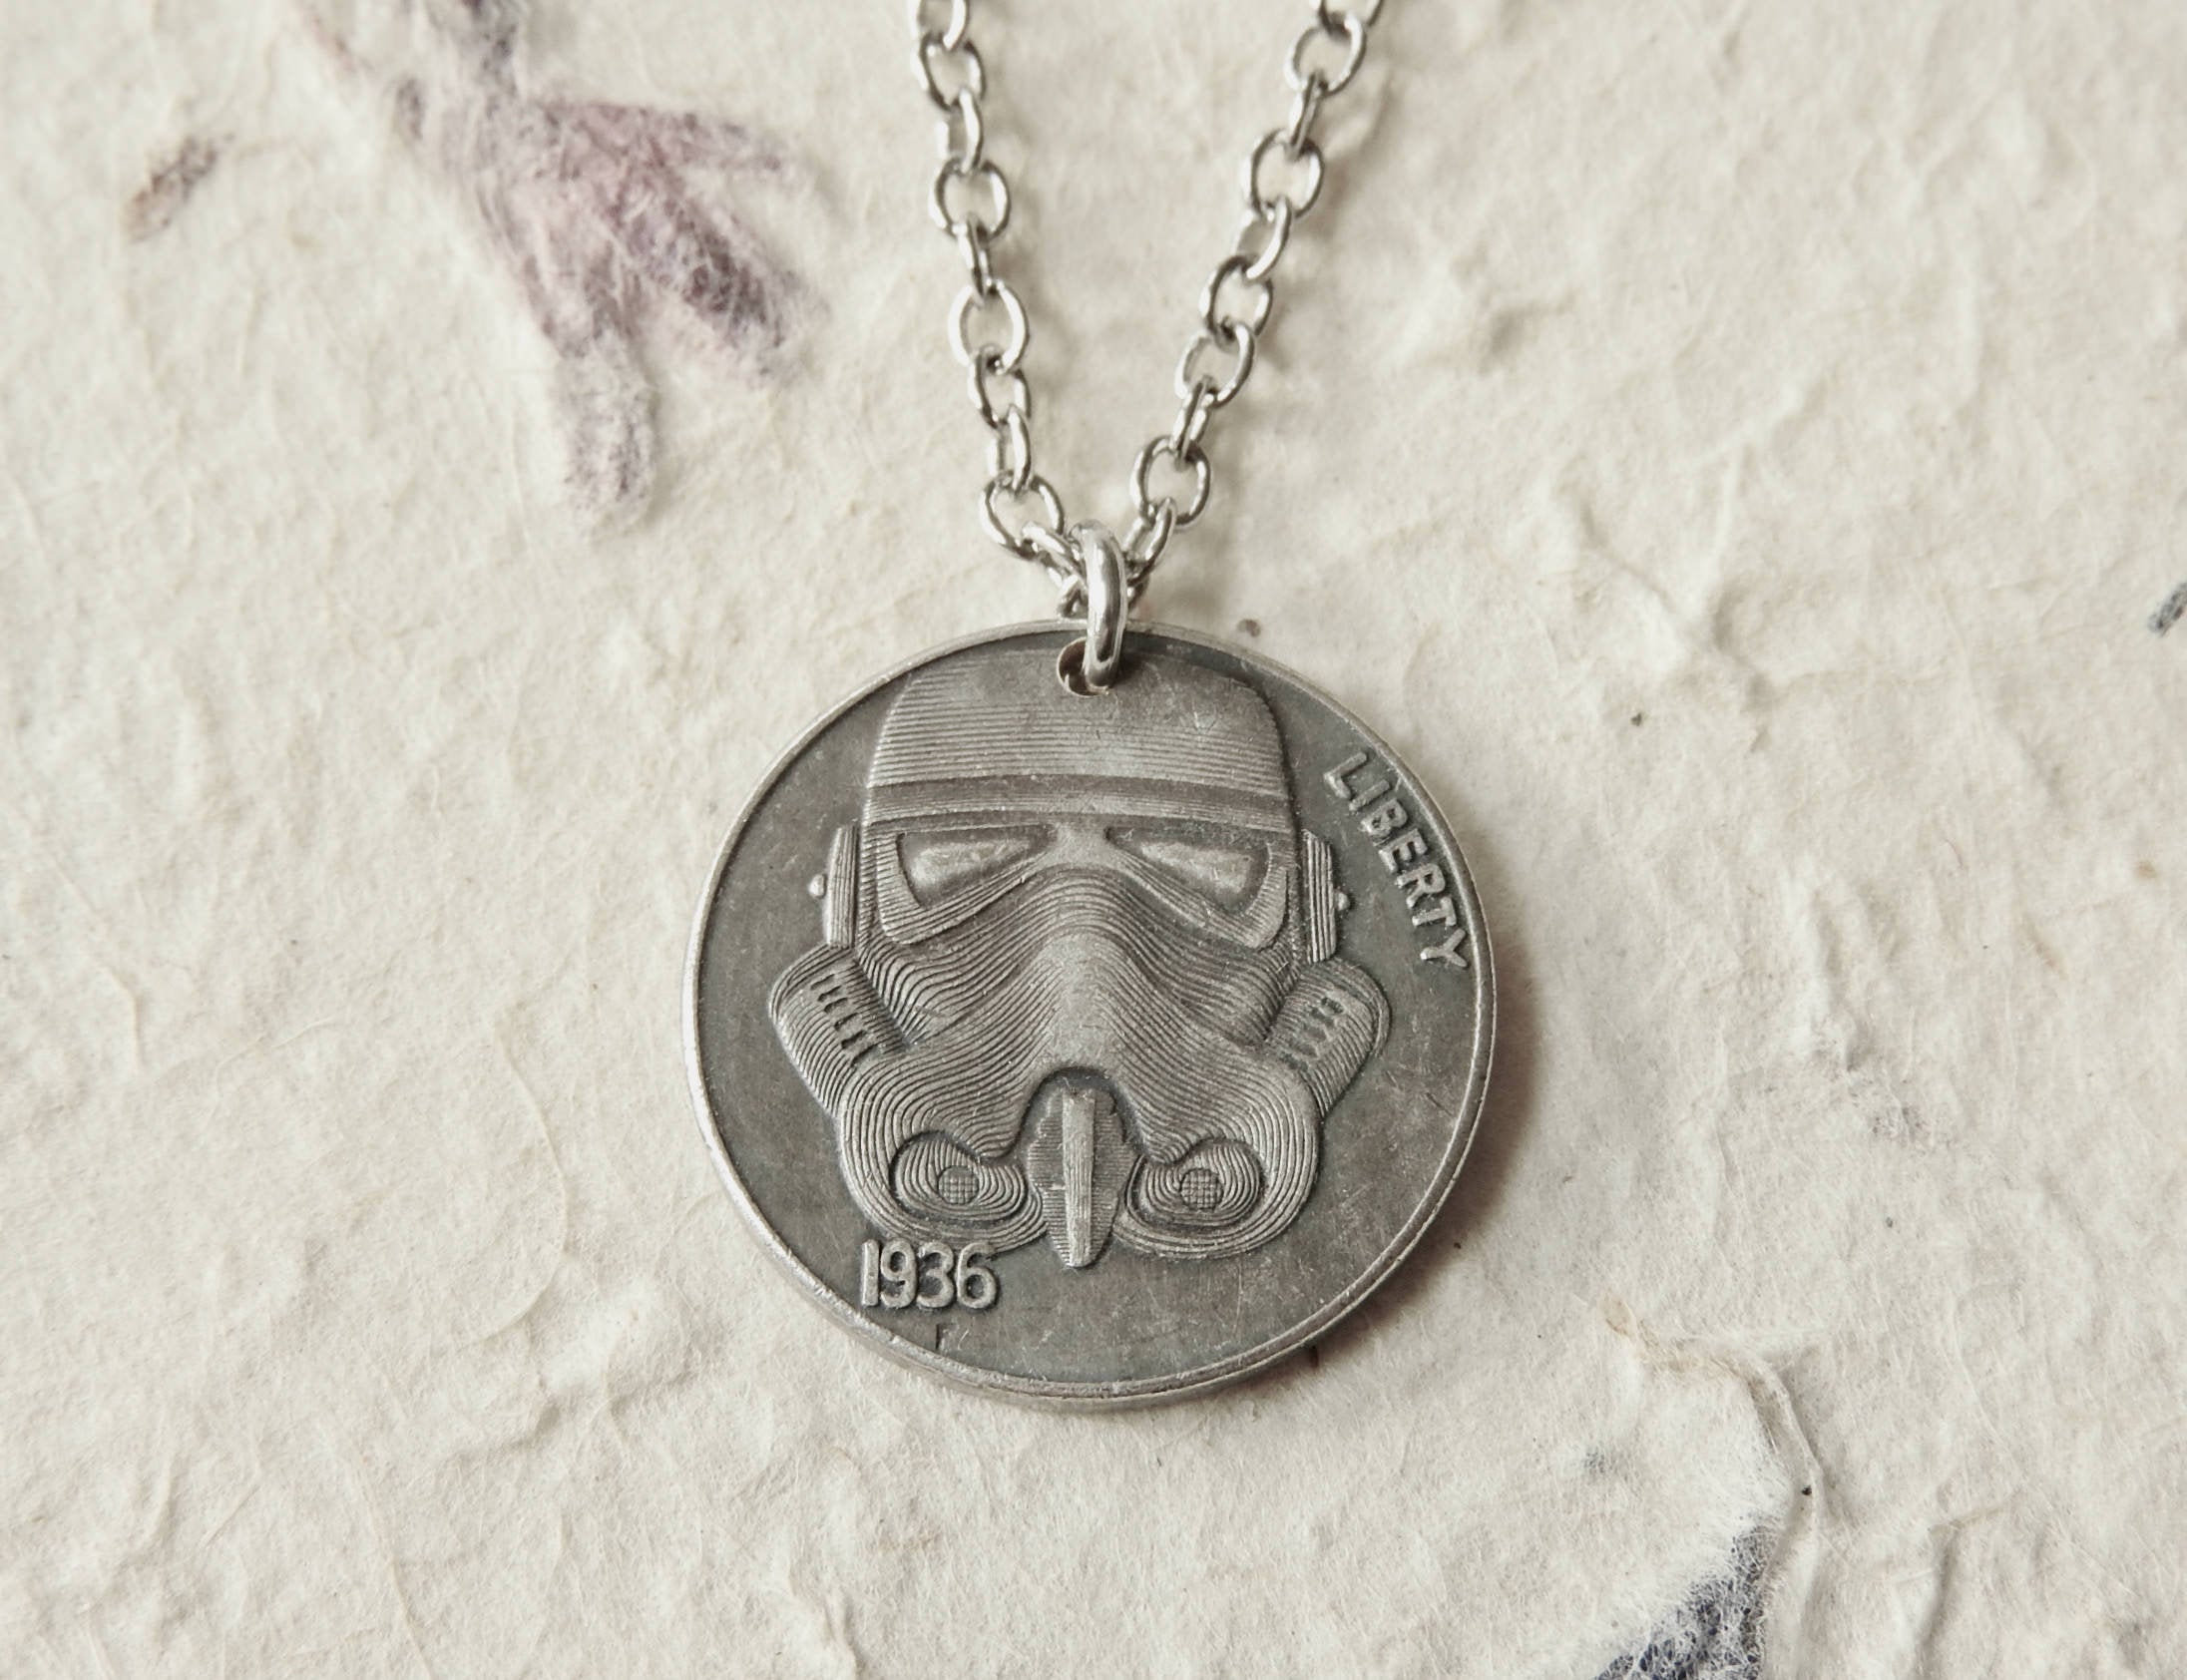 Our Top 10 Pieces of Star Wars Jewelry for the Geek Chic in Us All